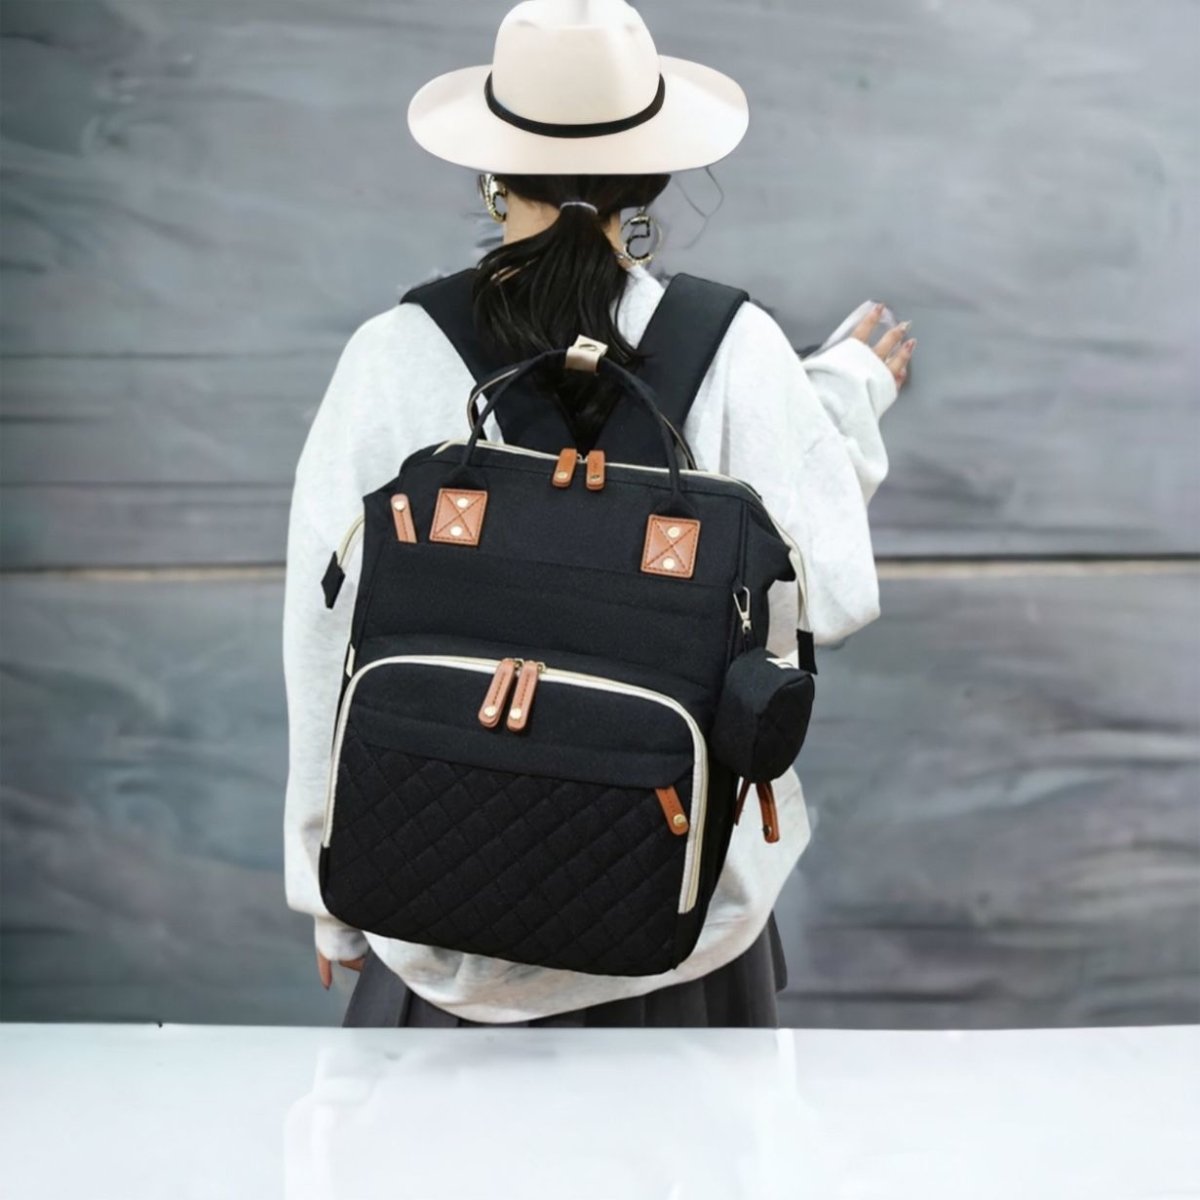 Nappy Backpack - Mimi & Co